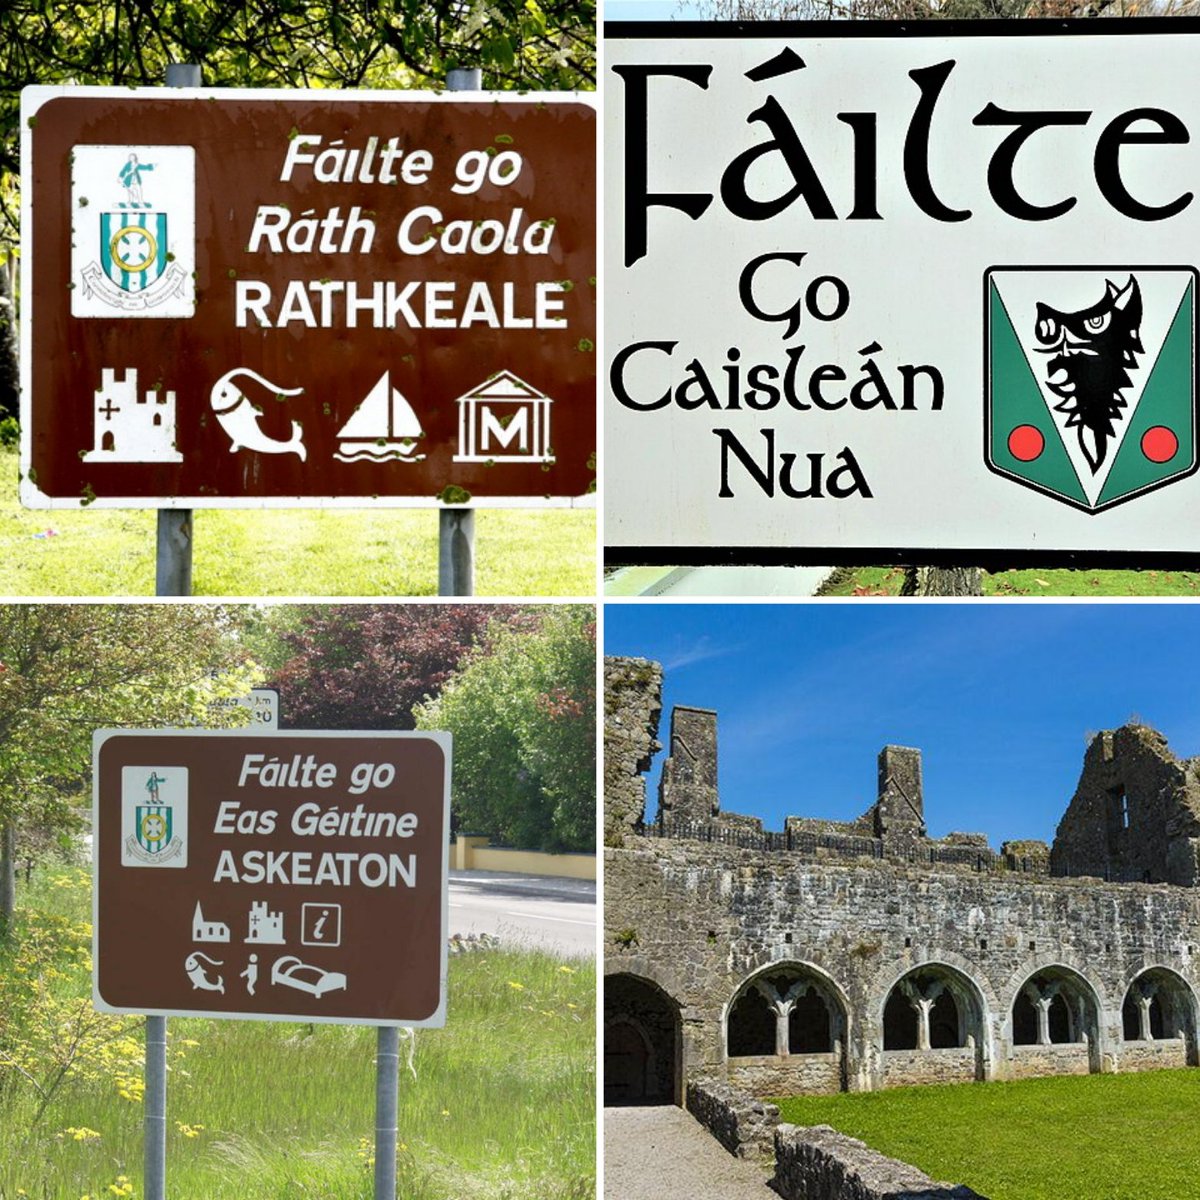 Delighted to see funding announced by Minister @HHumphreysFG to support town teams in Newcastle West, Kilmallock, Askeaton & Rathkeale to drive regeneration across these towns tackling vacancy This is something I'm committed to building on if elected Mayor #ButlerForMayor